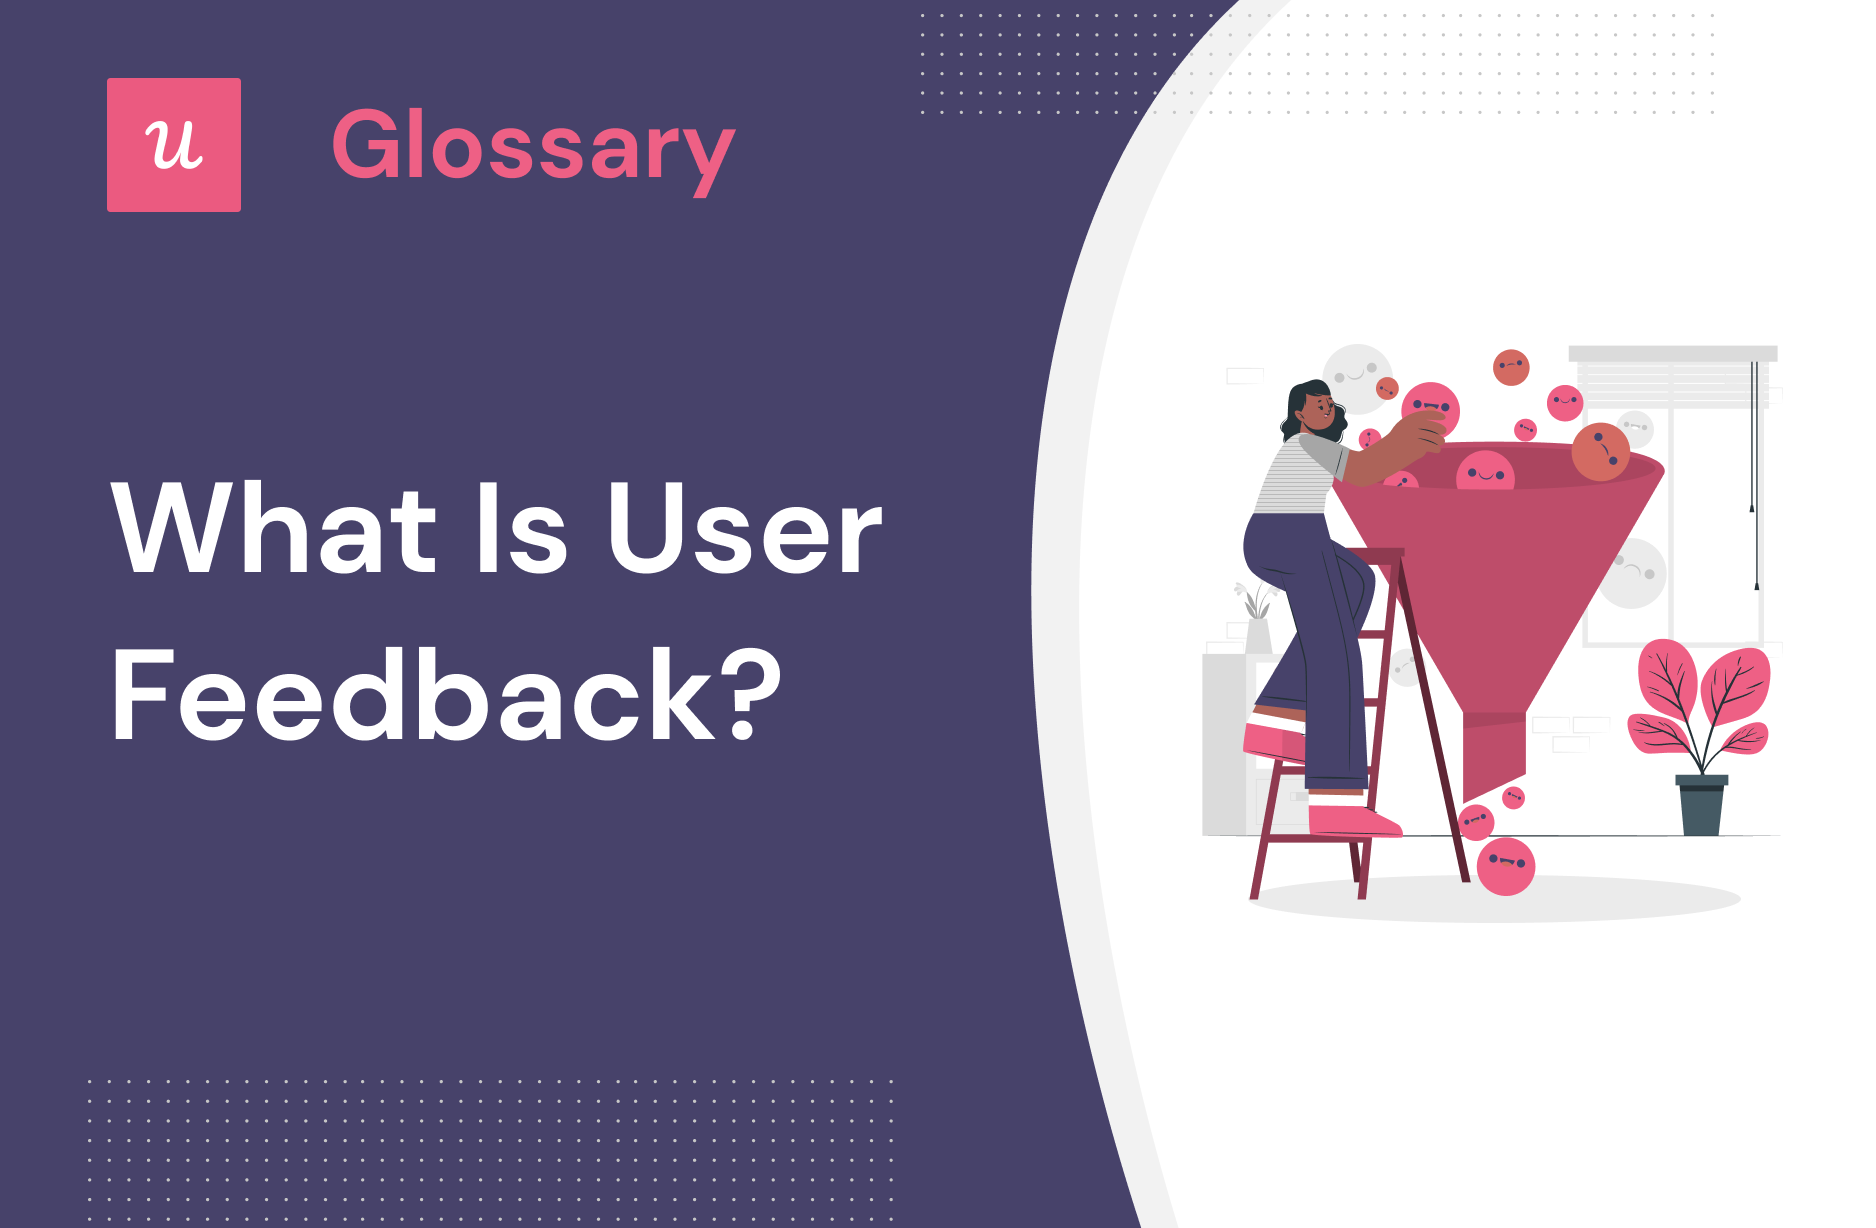 What is User Feedback?